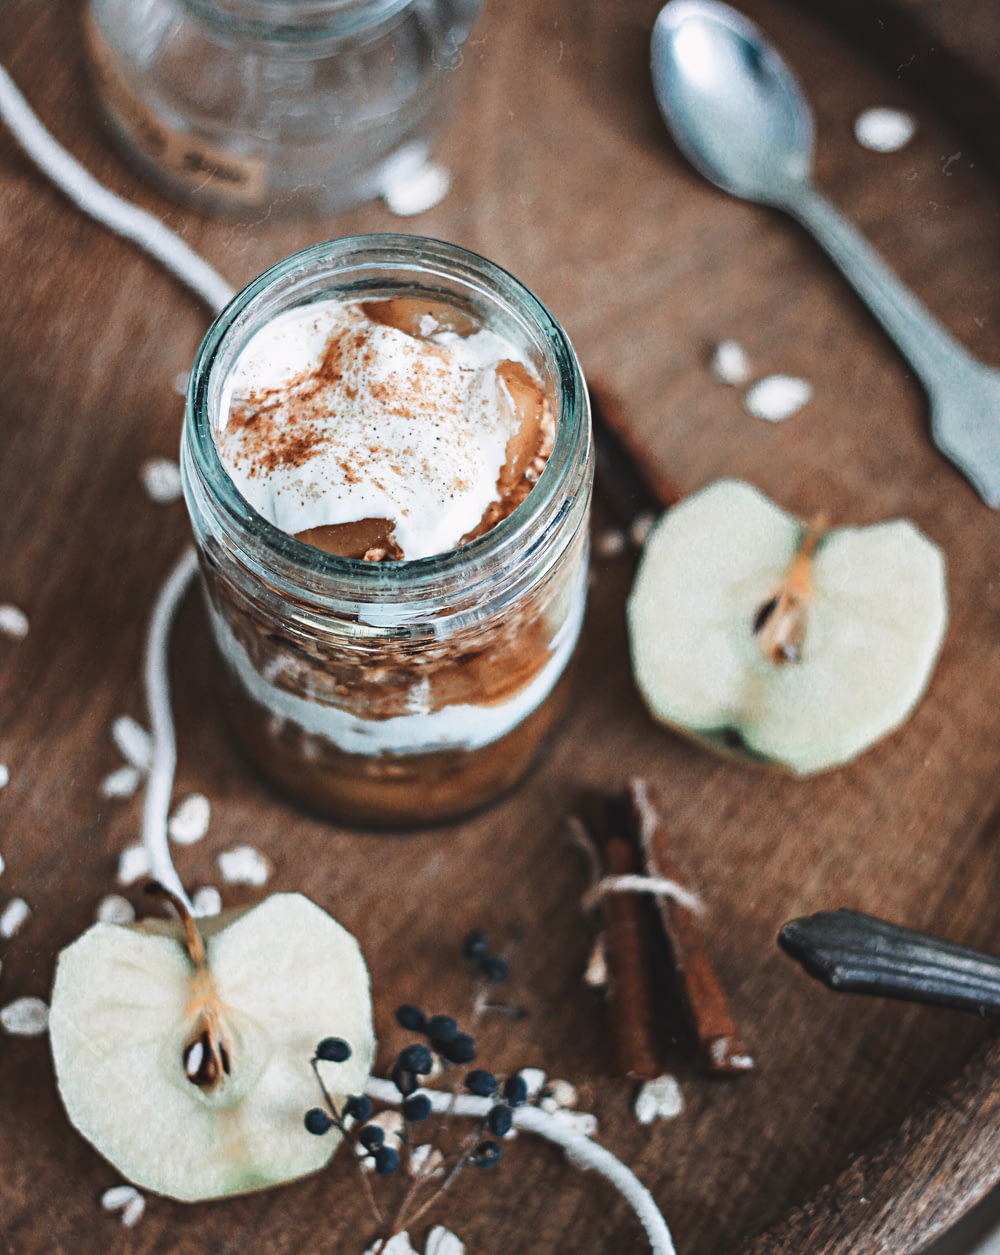 chocolate in clear glass jar near apple slices